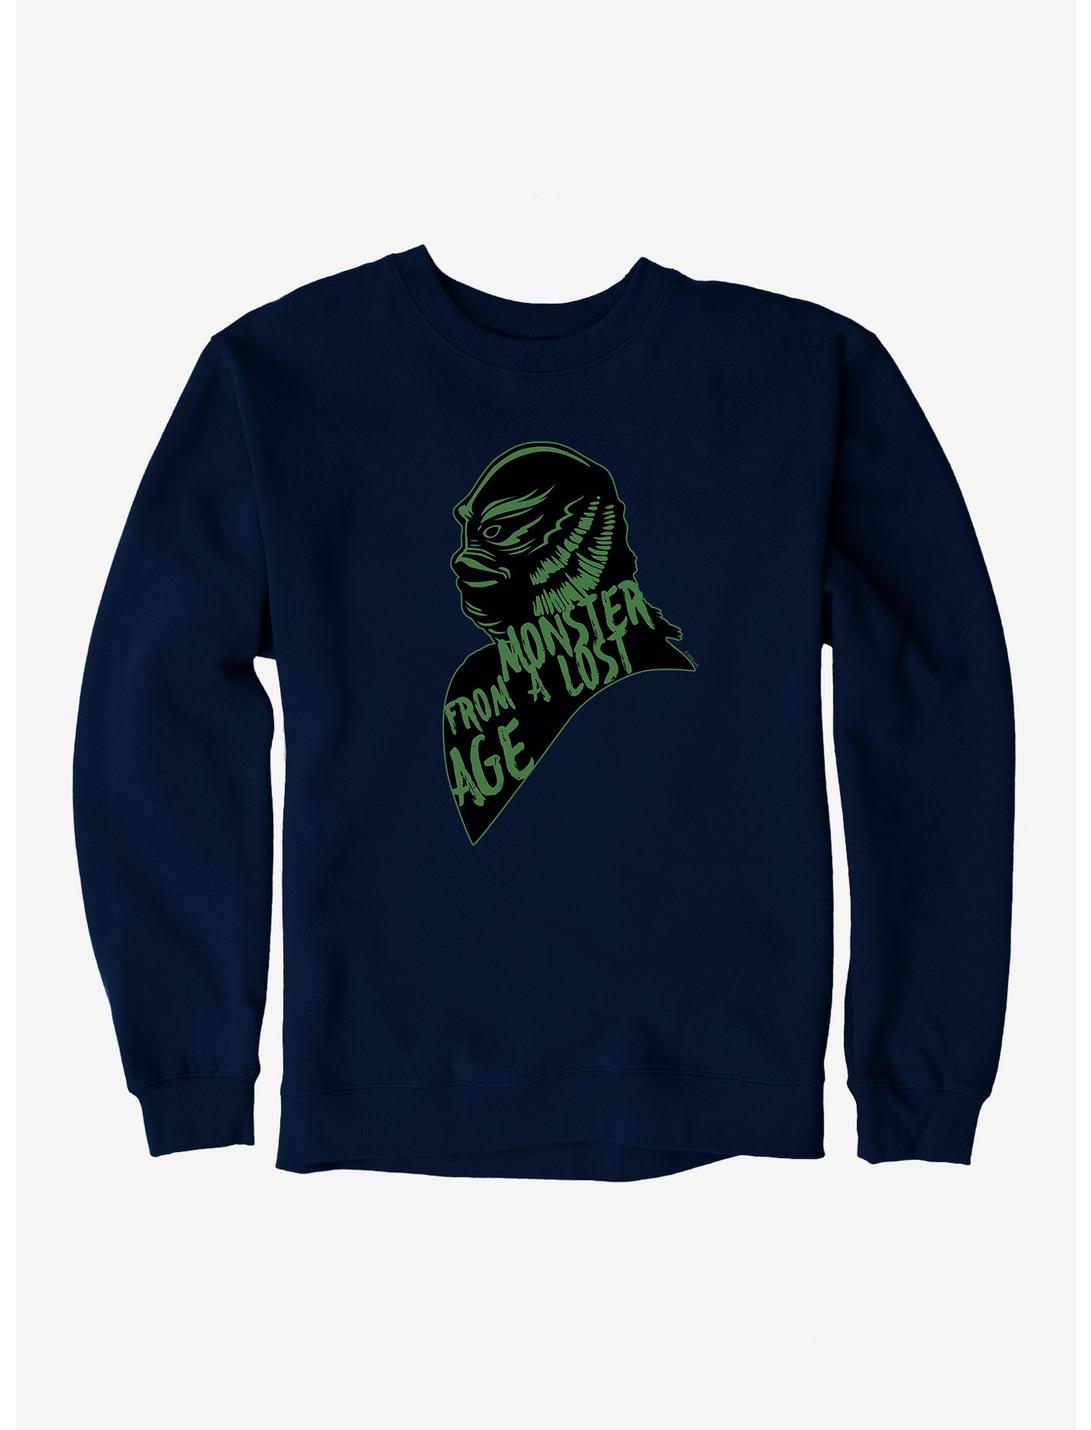 Universal Monsters Creature From The Black Lagoon Monster From A Lost Age Sweatshirt, NAVY, hi-res